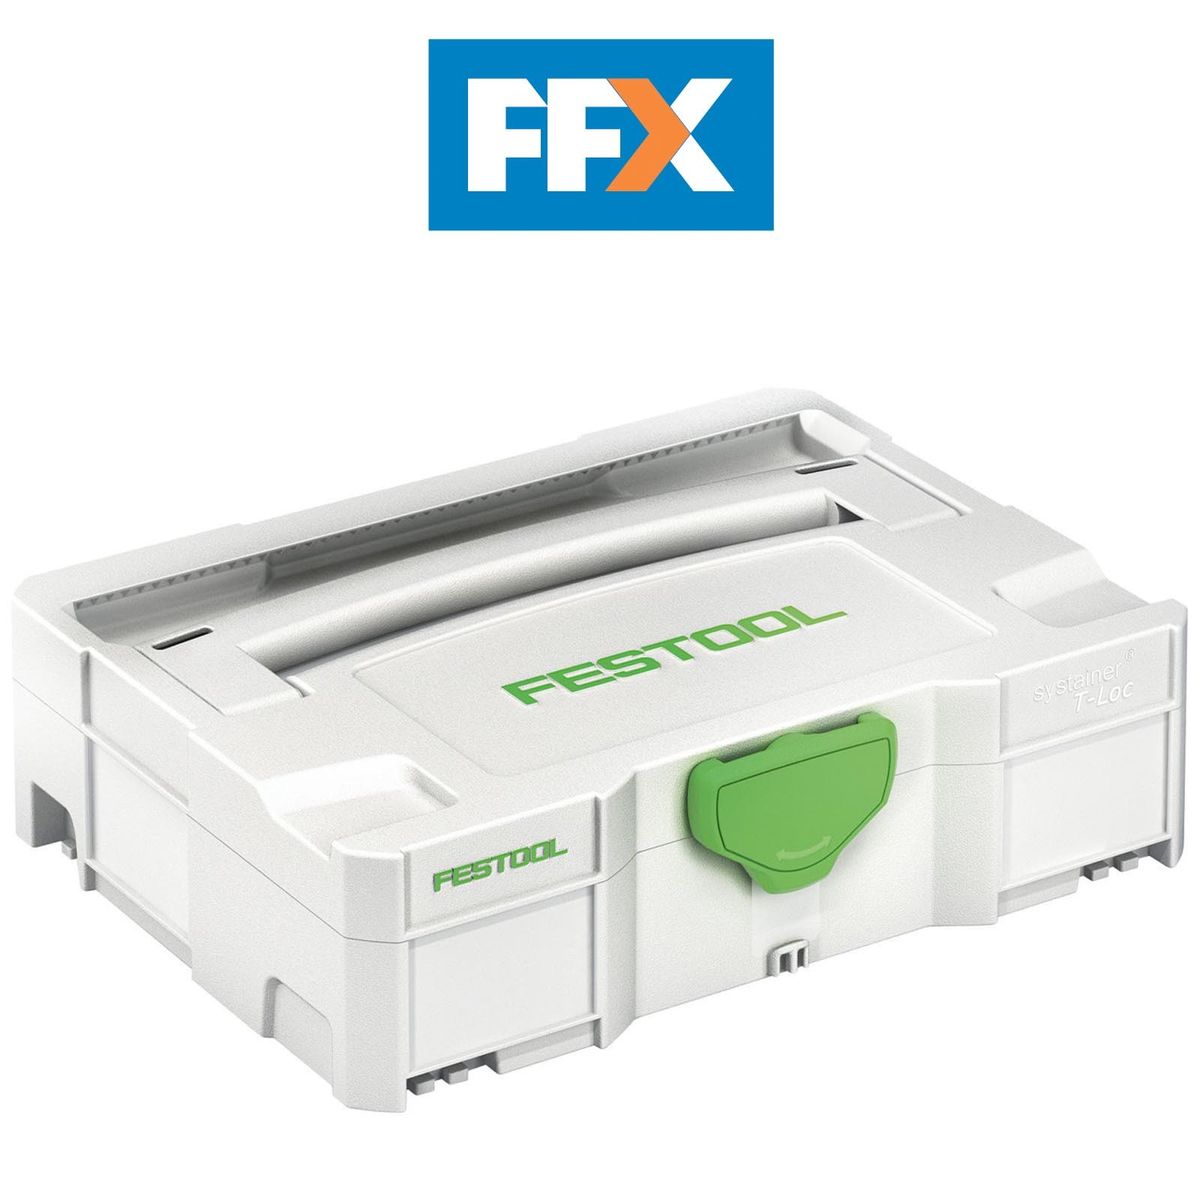 Systainer Festool T-loc Sys 1 Tl - Sans Calage - 497563